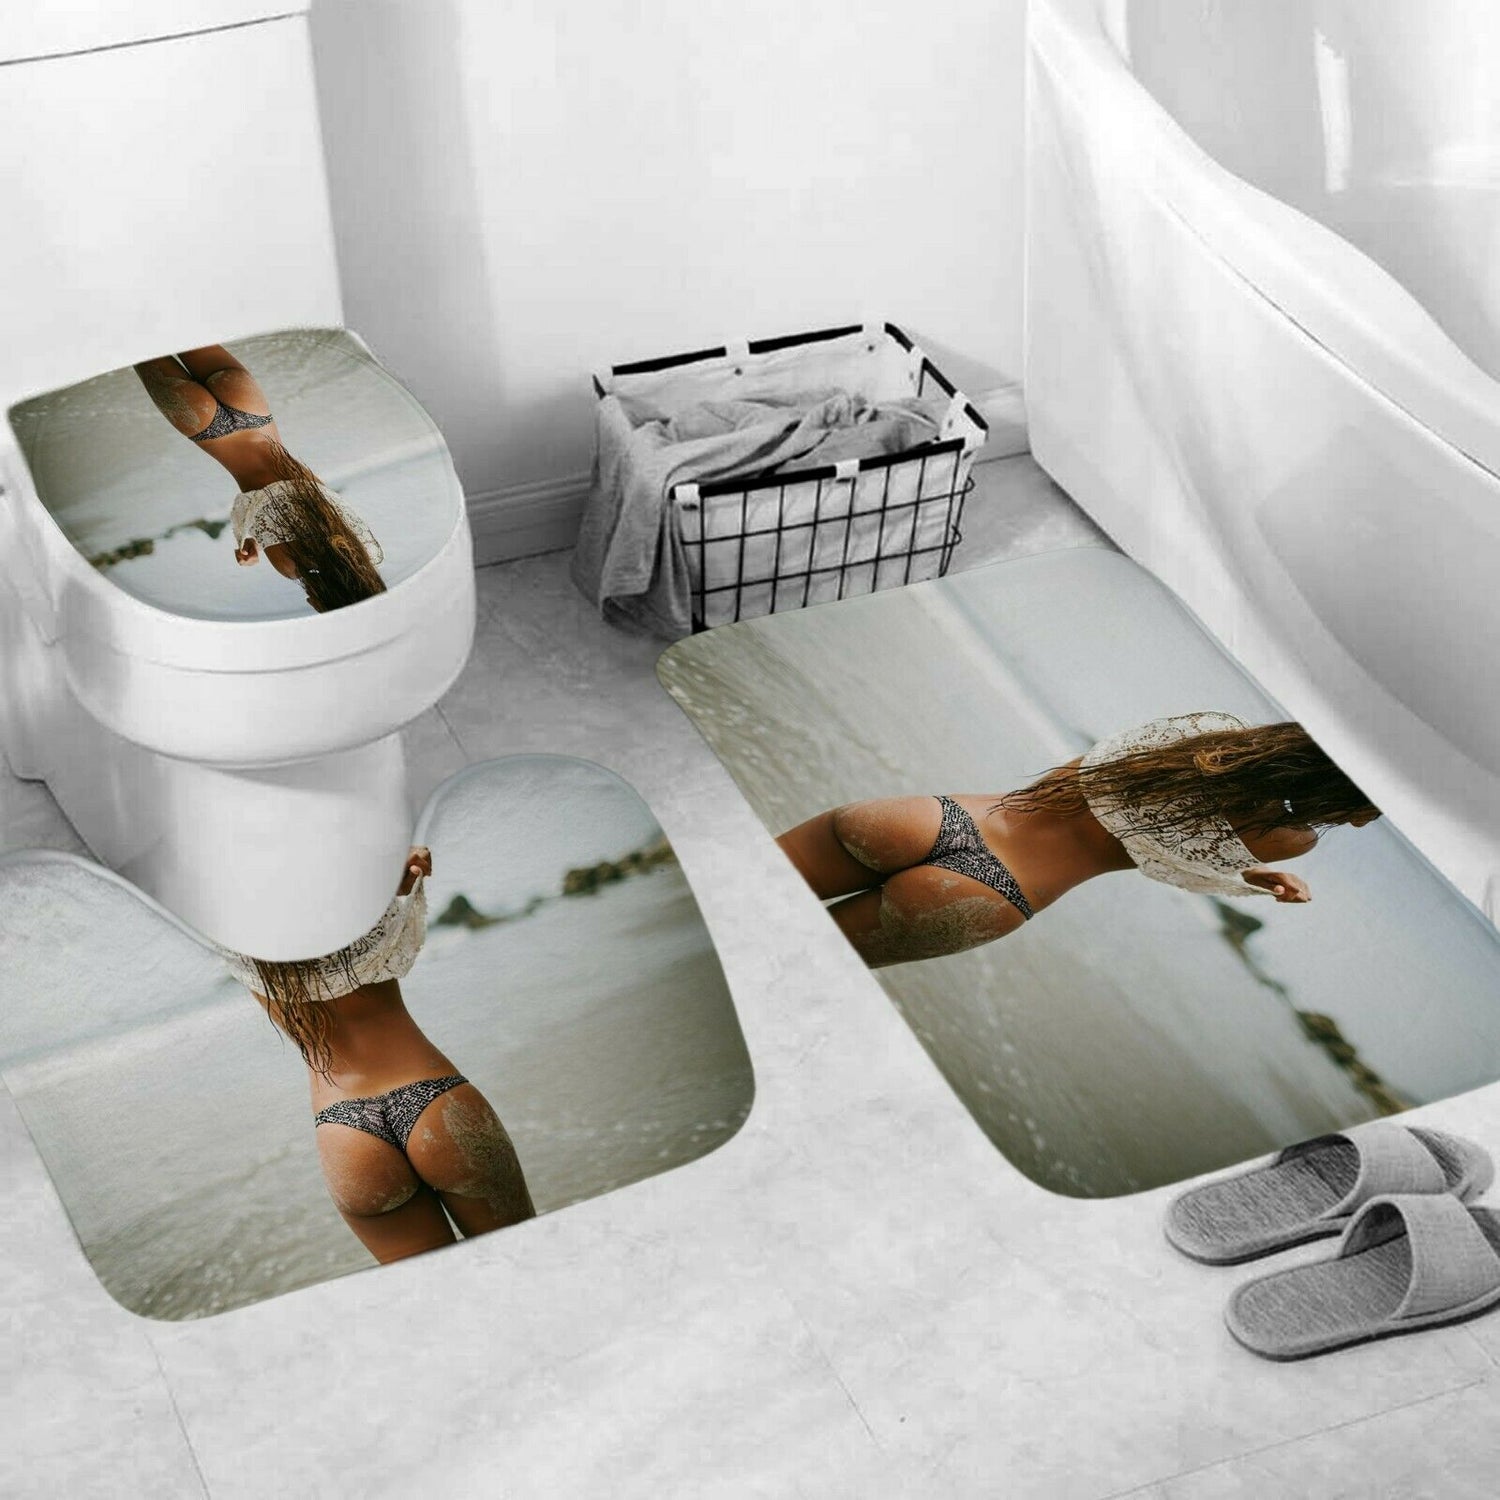 Sexy Woman Shower Curtain Bathroom Rug Set Bath Mat Non-Slip Toilet Lid Cover--Free Shipping at meselling99